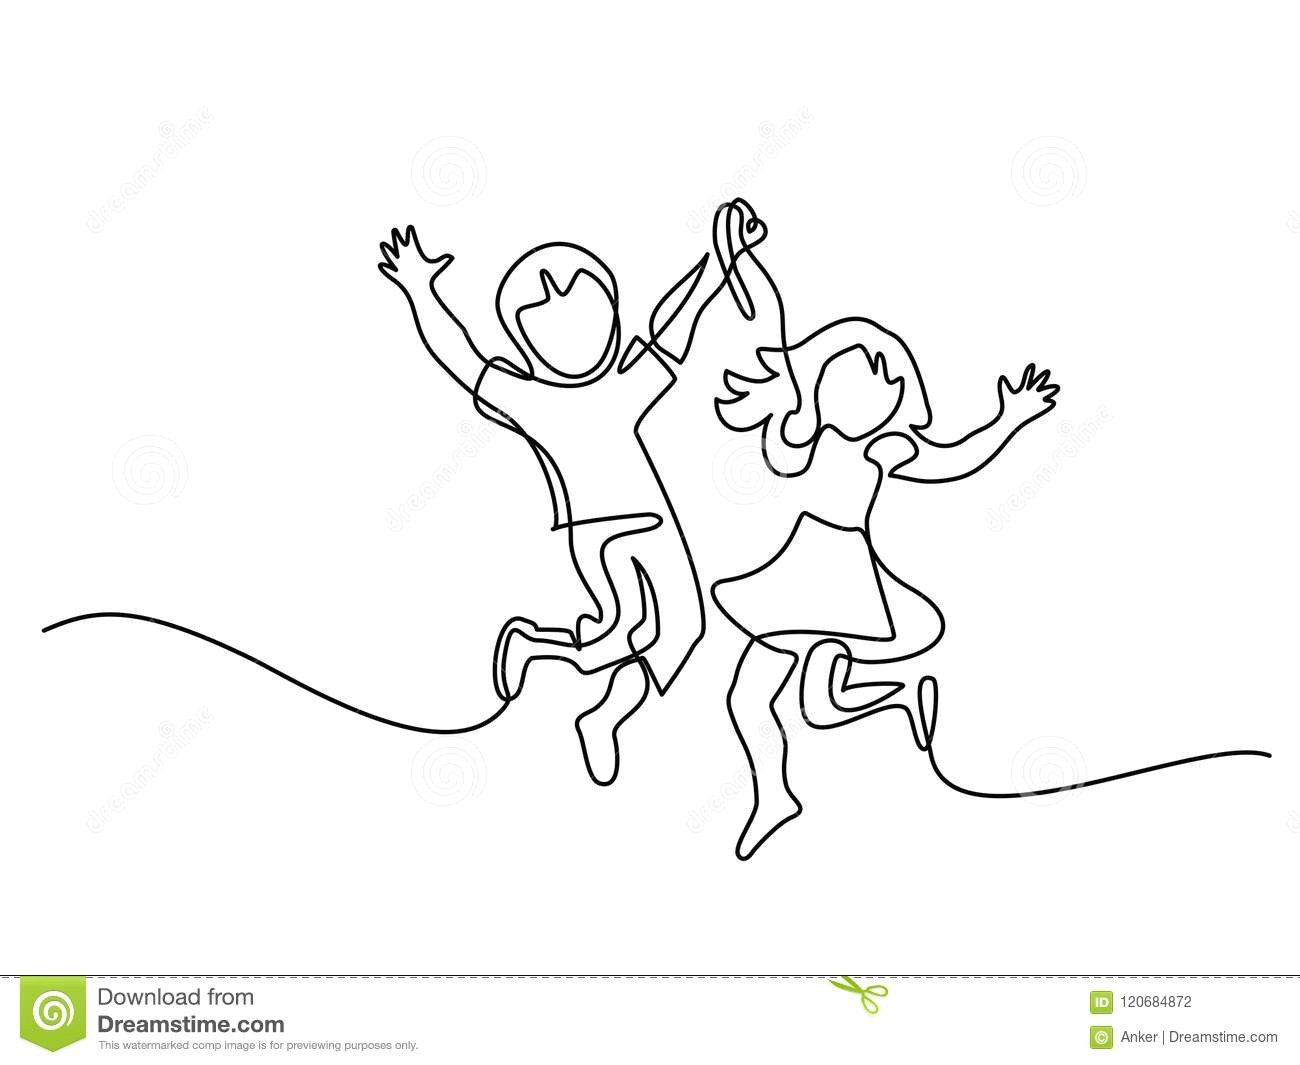 Drawings Of Children S Hands Happy Jumping Children Holding Hands Stock Vector Illustration Of